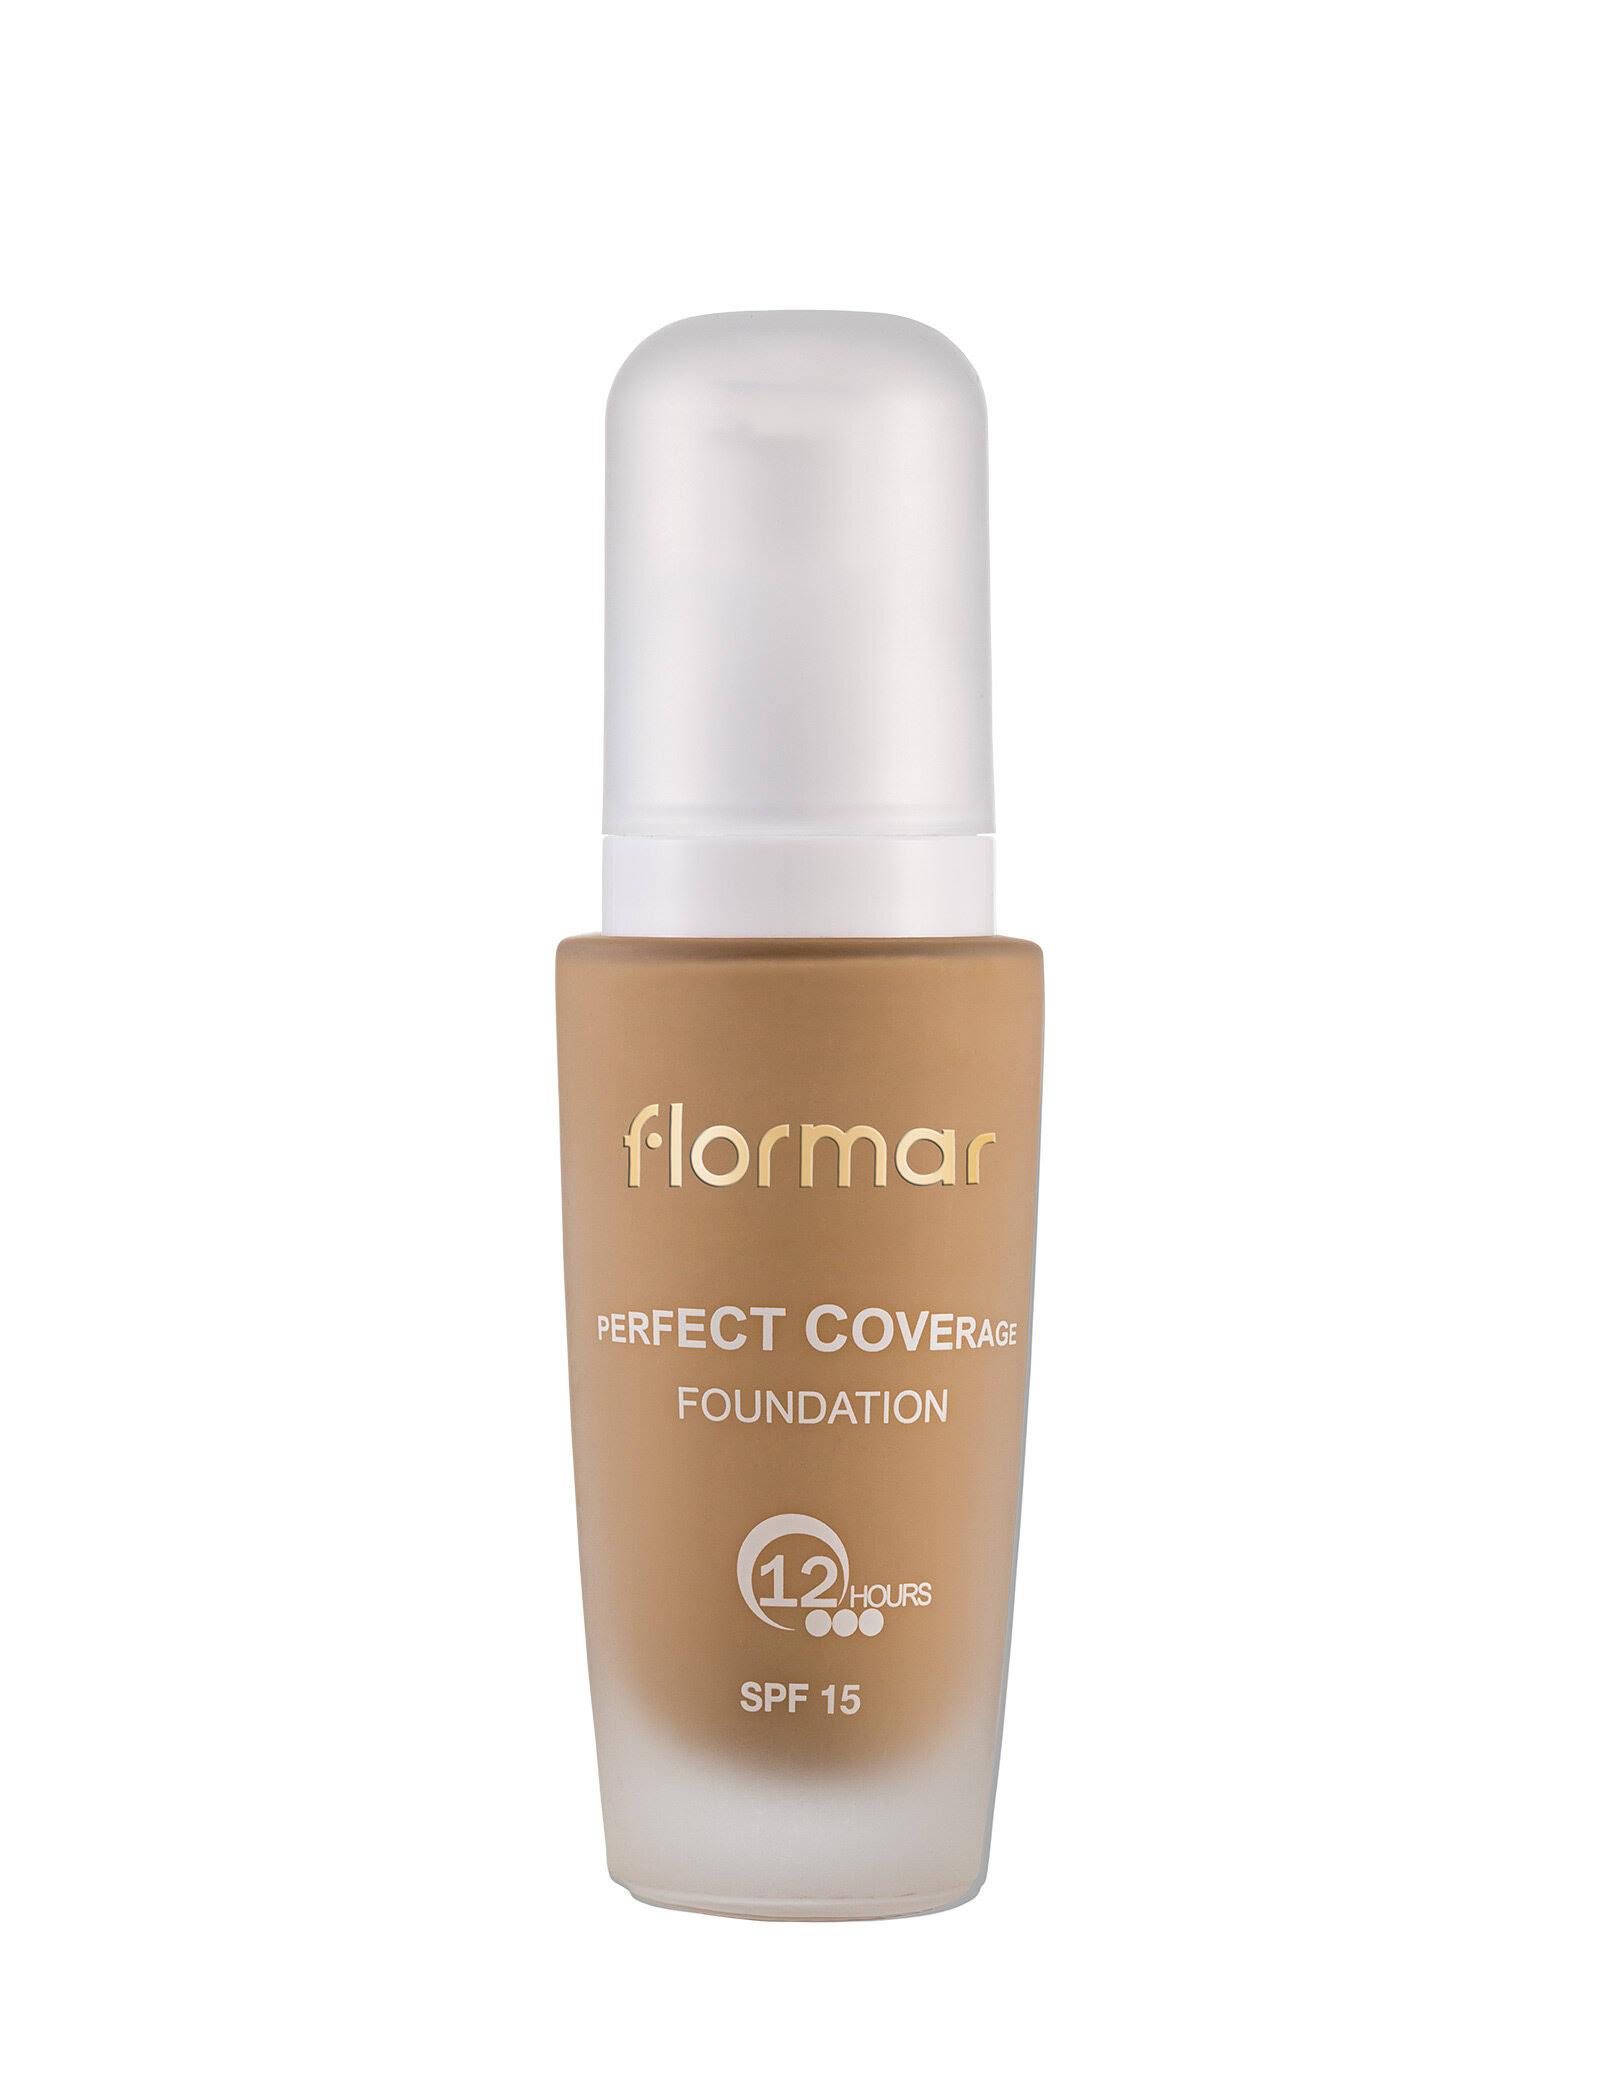 Flormar Perfect Coverage Foundation - 108